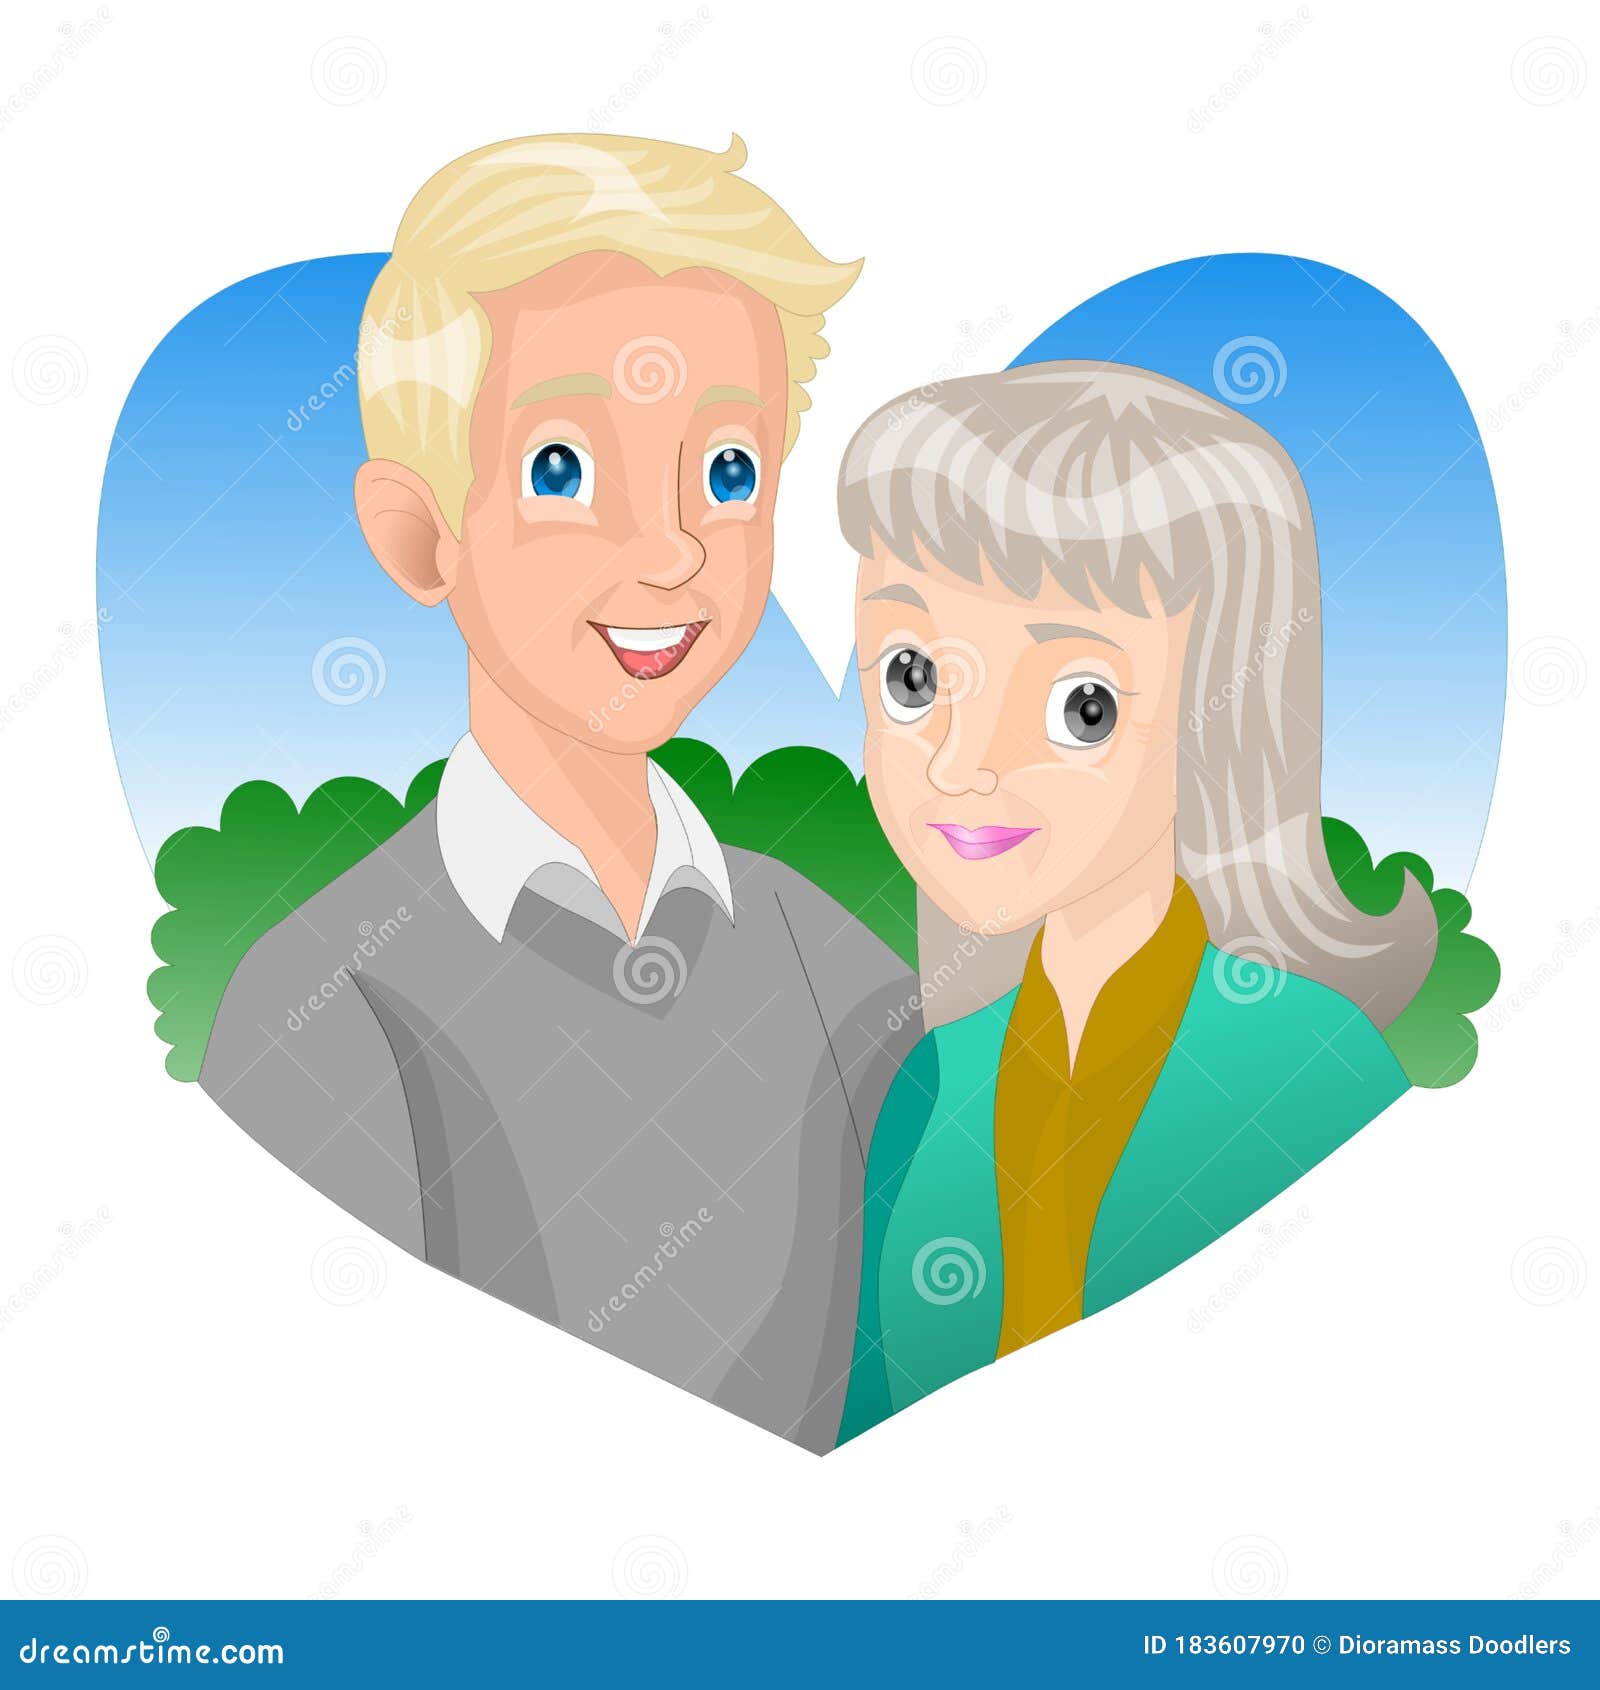 Funny Cartoons Old Age Stock Illustrations – 14 Funny Cartoons Old Age  Stock Illustrations, Vectors & Clipart - Dreamstime